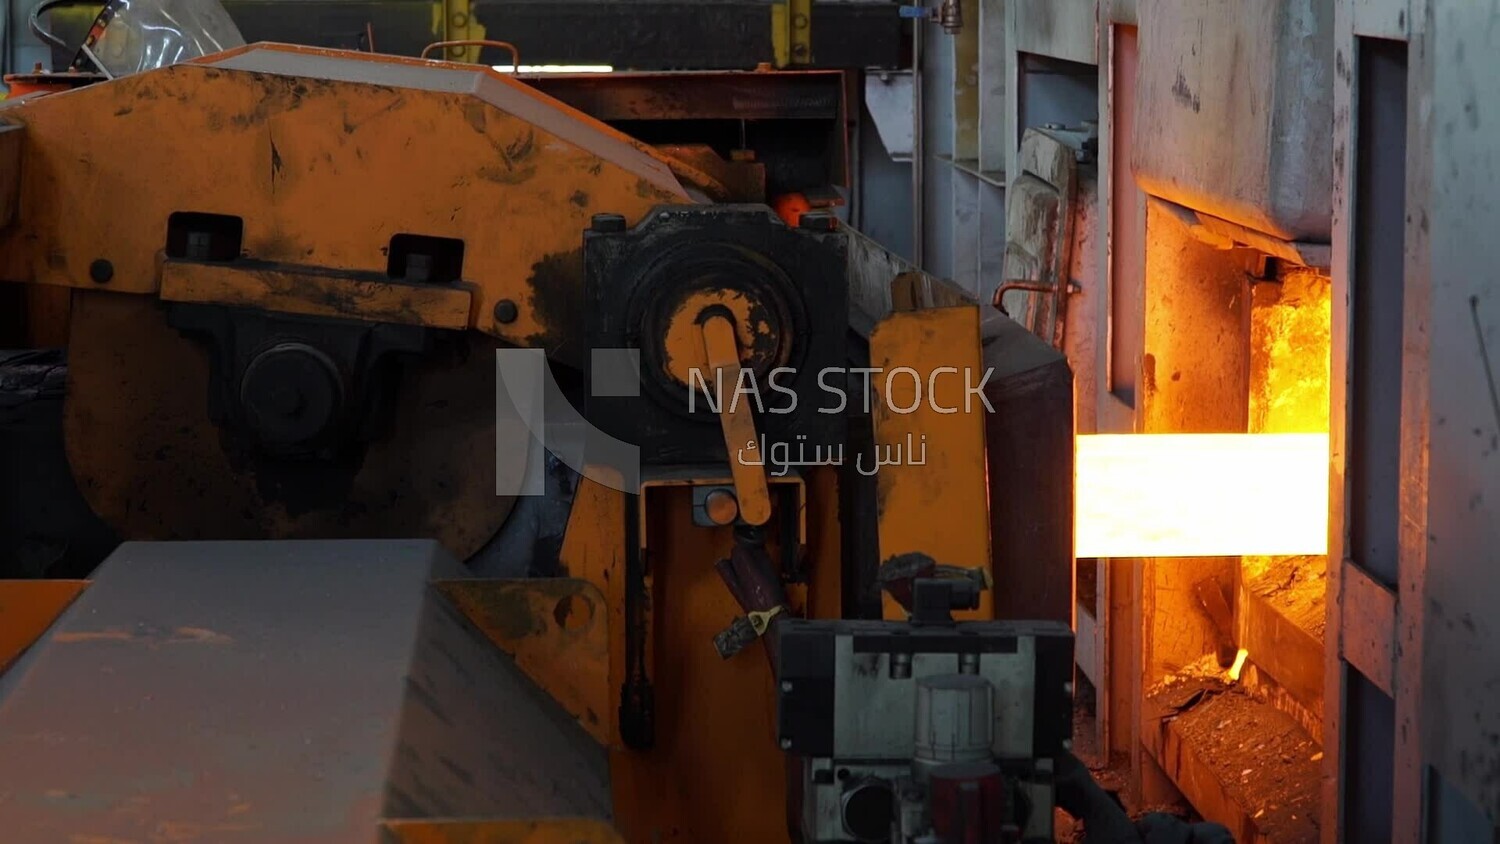 Iron and steel industry, metal production, heavy industries